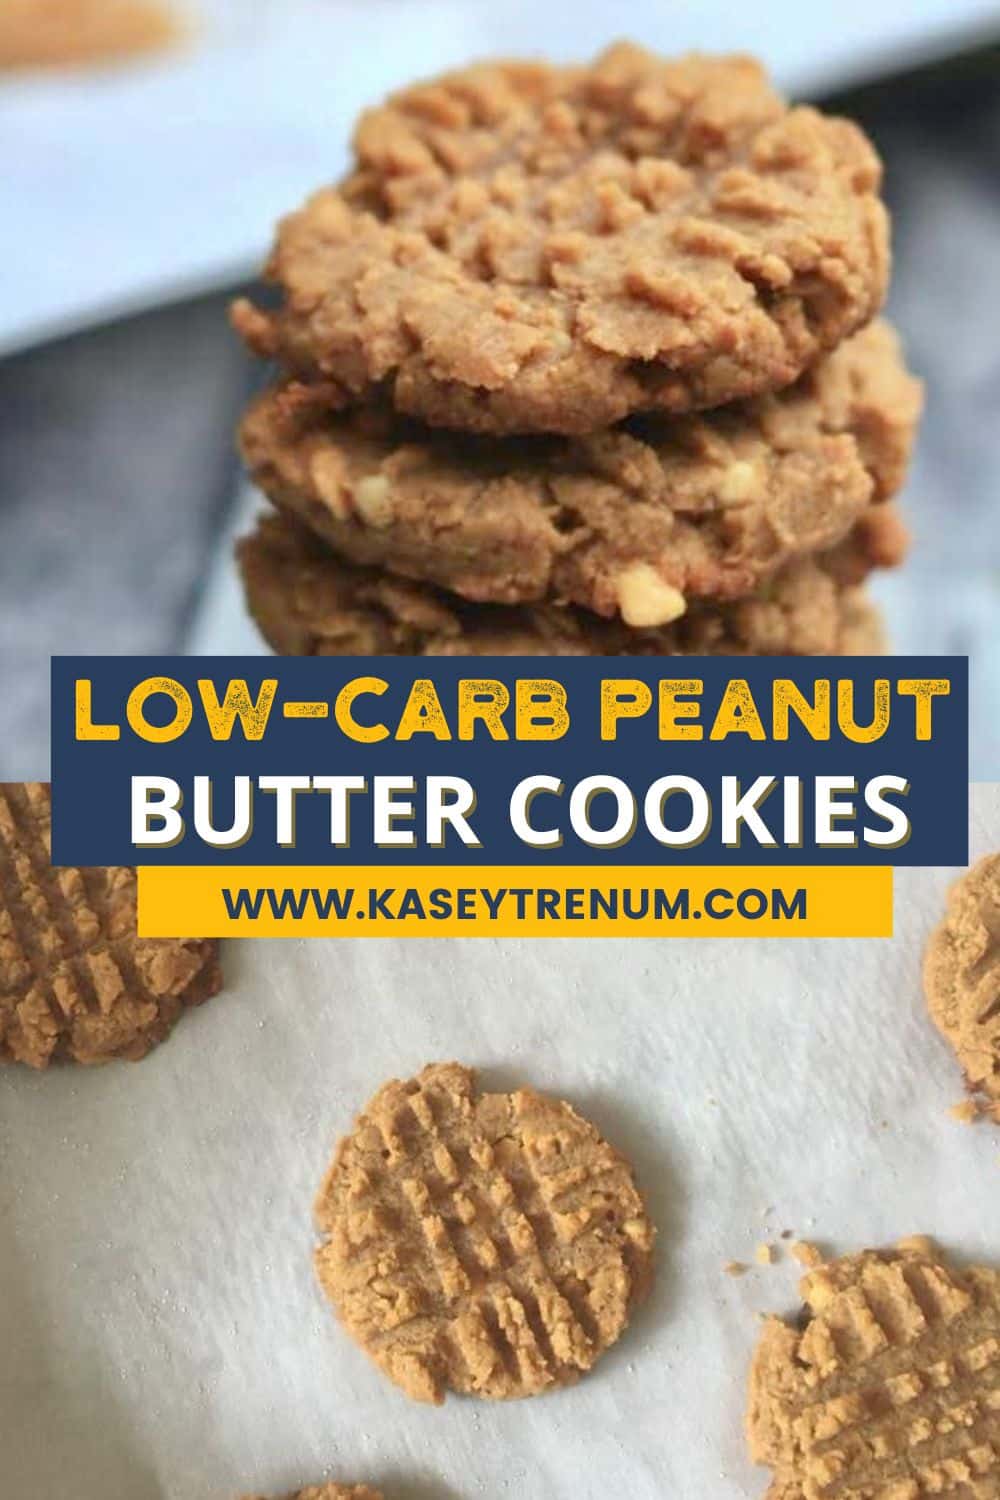 A close-up collage image of freshly baked keto peanut butter cookies stacked in the first image and on a baking sheet on the image underneath. These cookies are light brown in color, with a soft and chewy texture that's perfect for satisfying your sweet tooth on a low-carb diet.